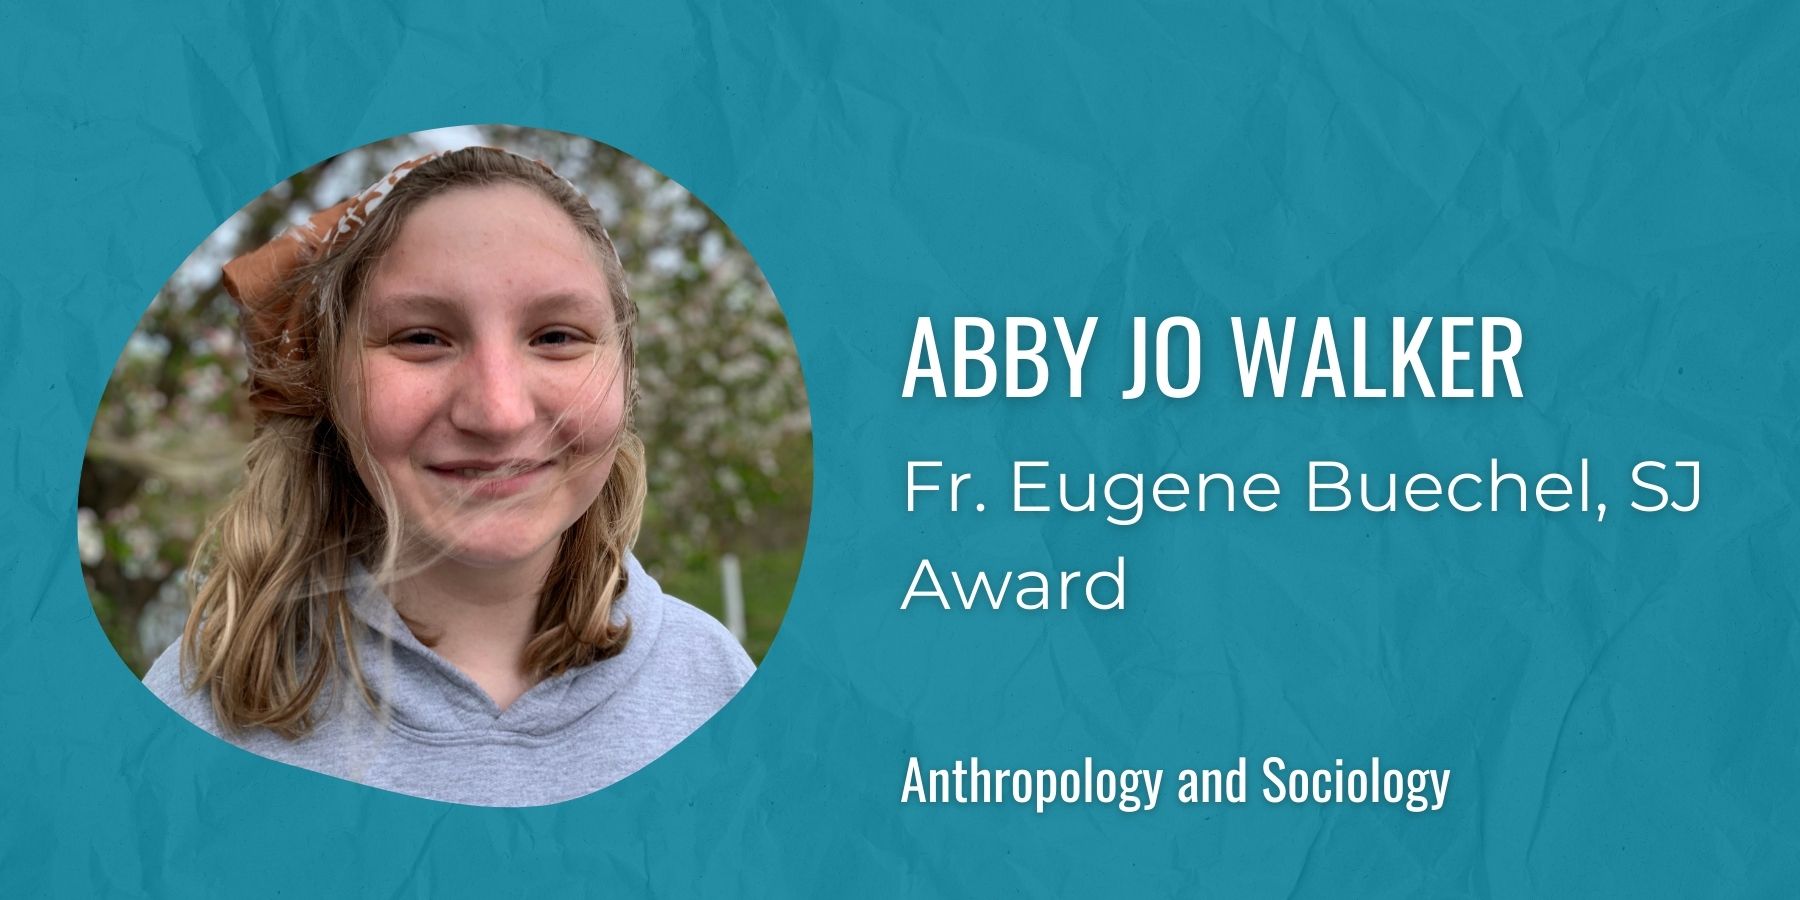 Image of Abby Jo Walker with text: Fr. Eugene Buechel, SJ Award, Anthropology and Sociology
